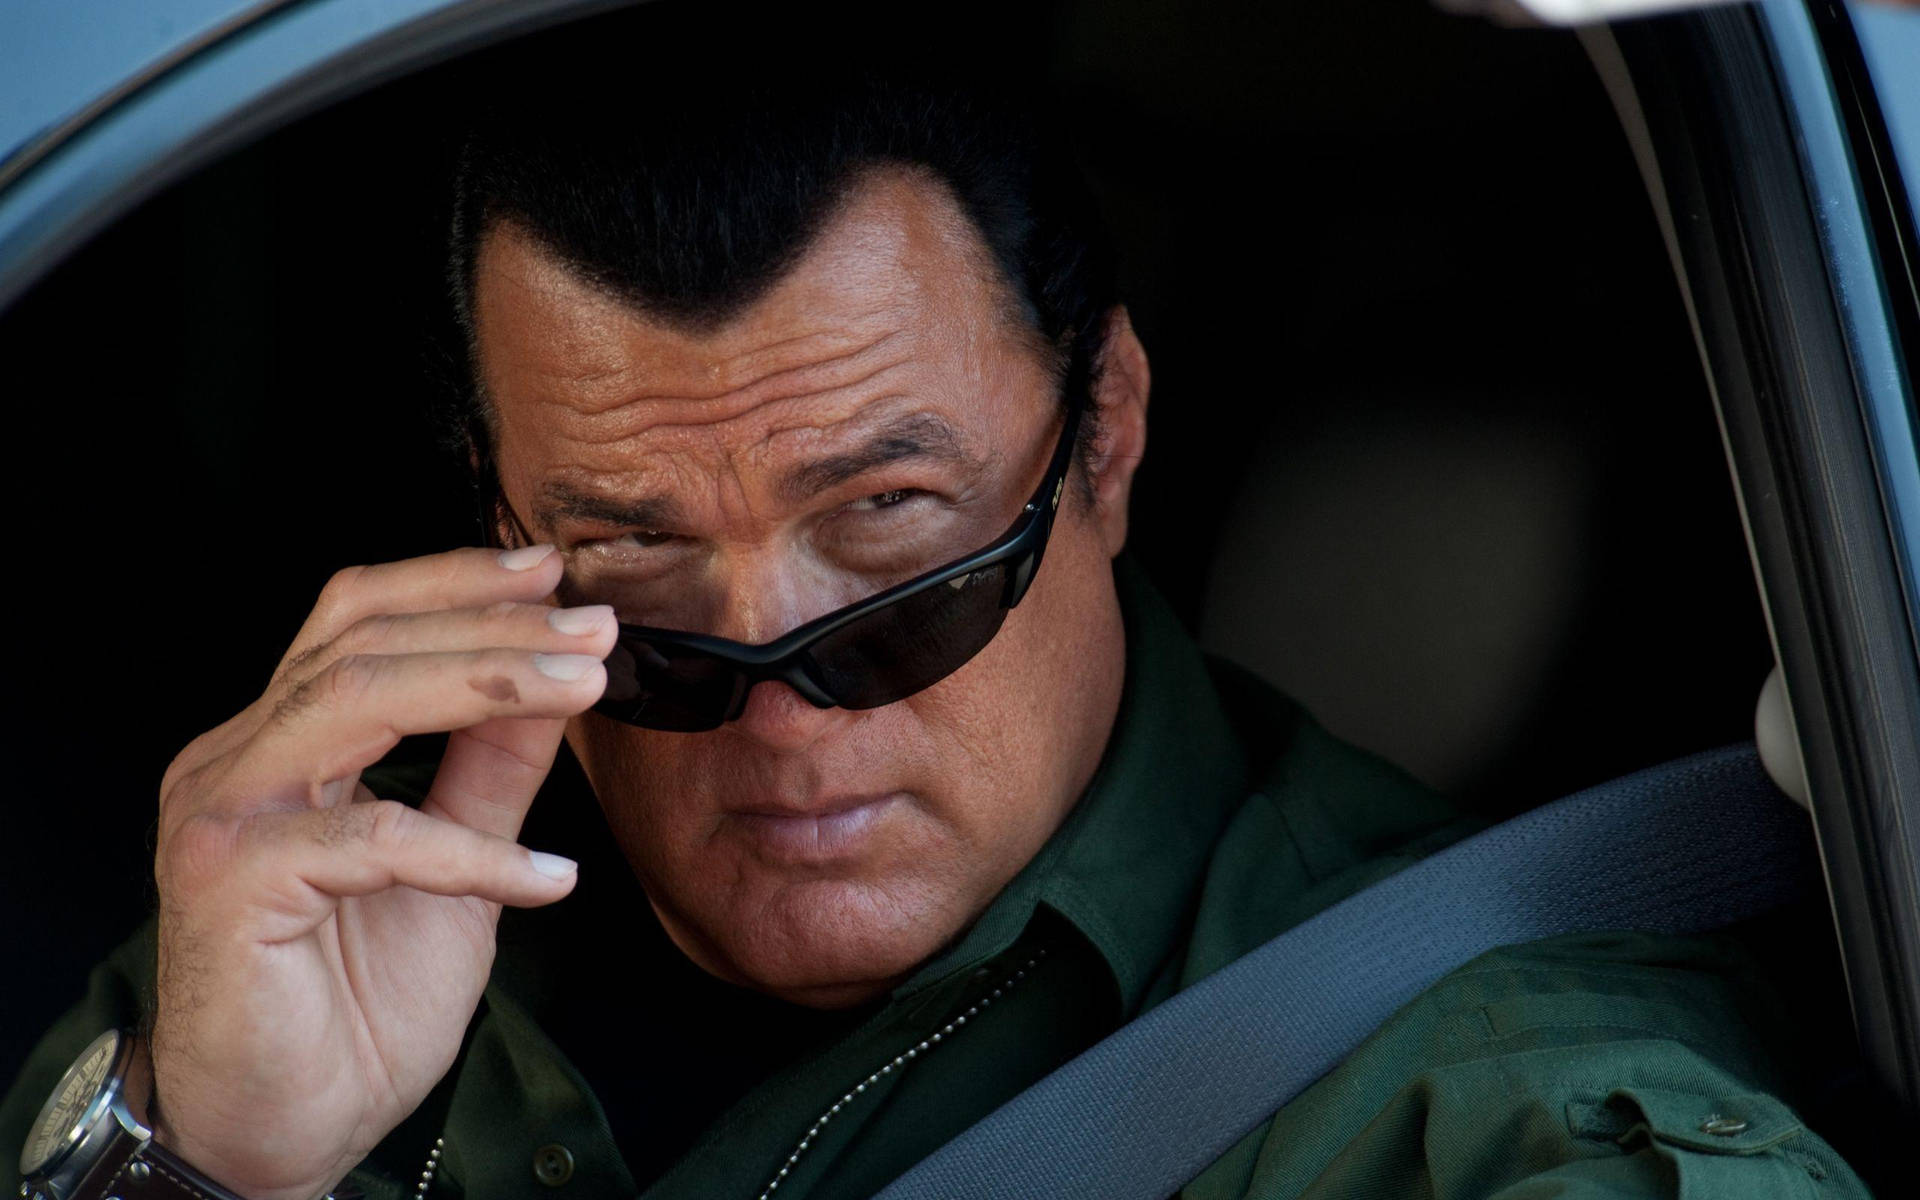 Steven Seagal in his role as Reserve Deputy Chief Wallpaper